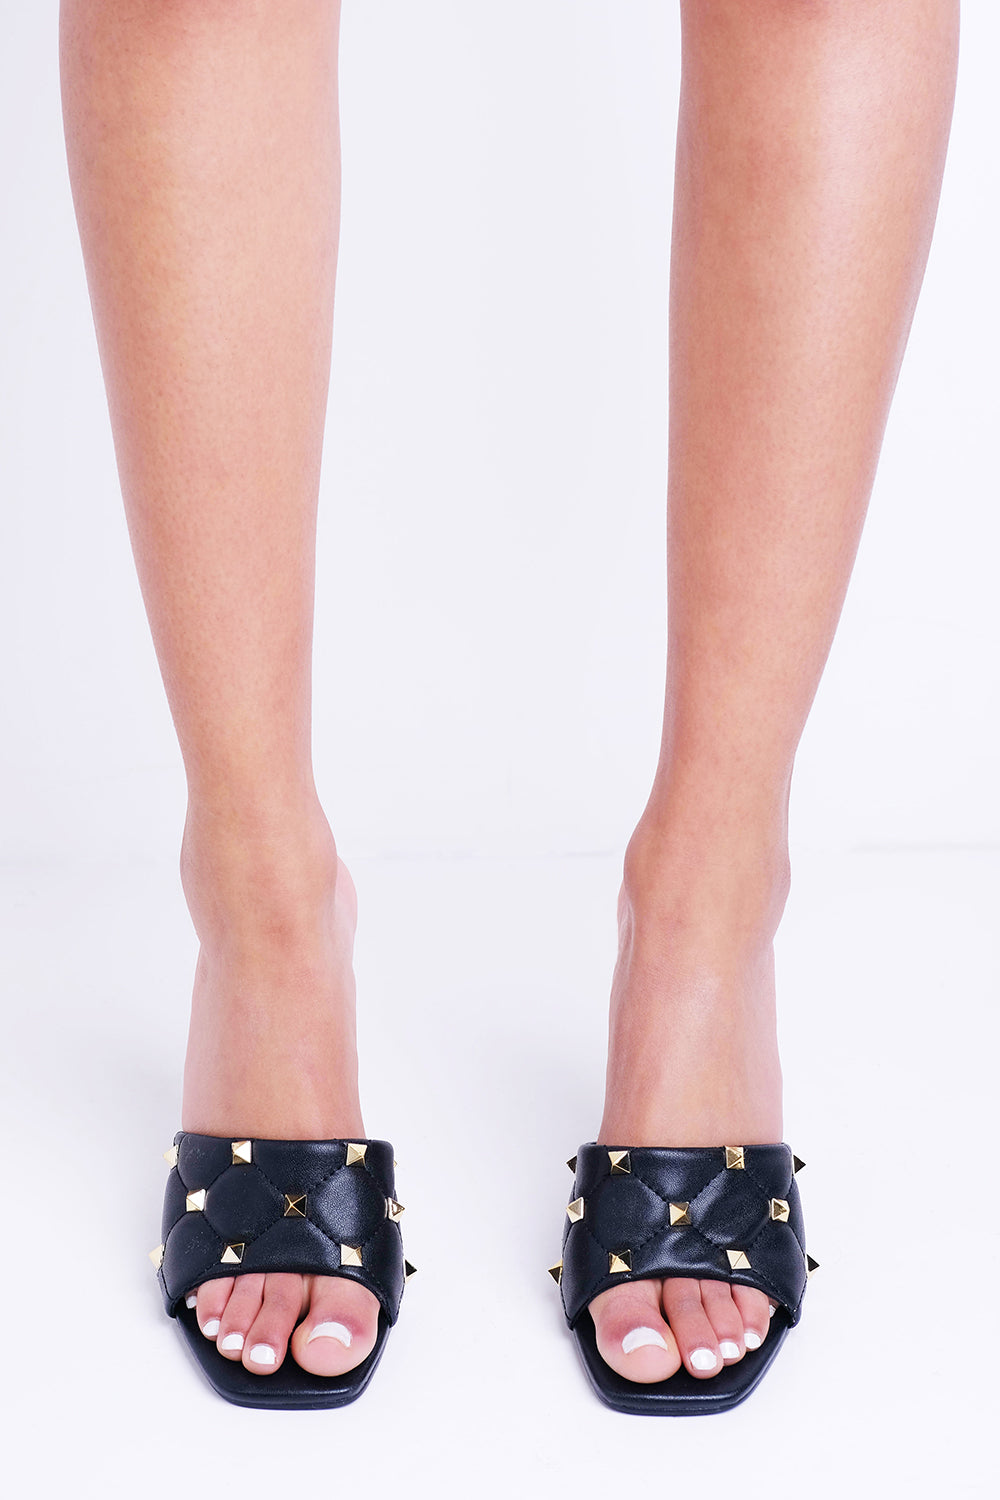 Black Square Toe High Heel Mules With Stud Details